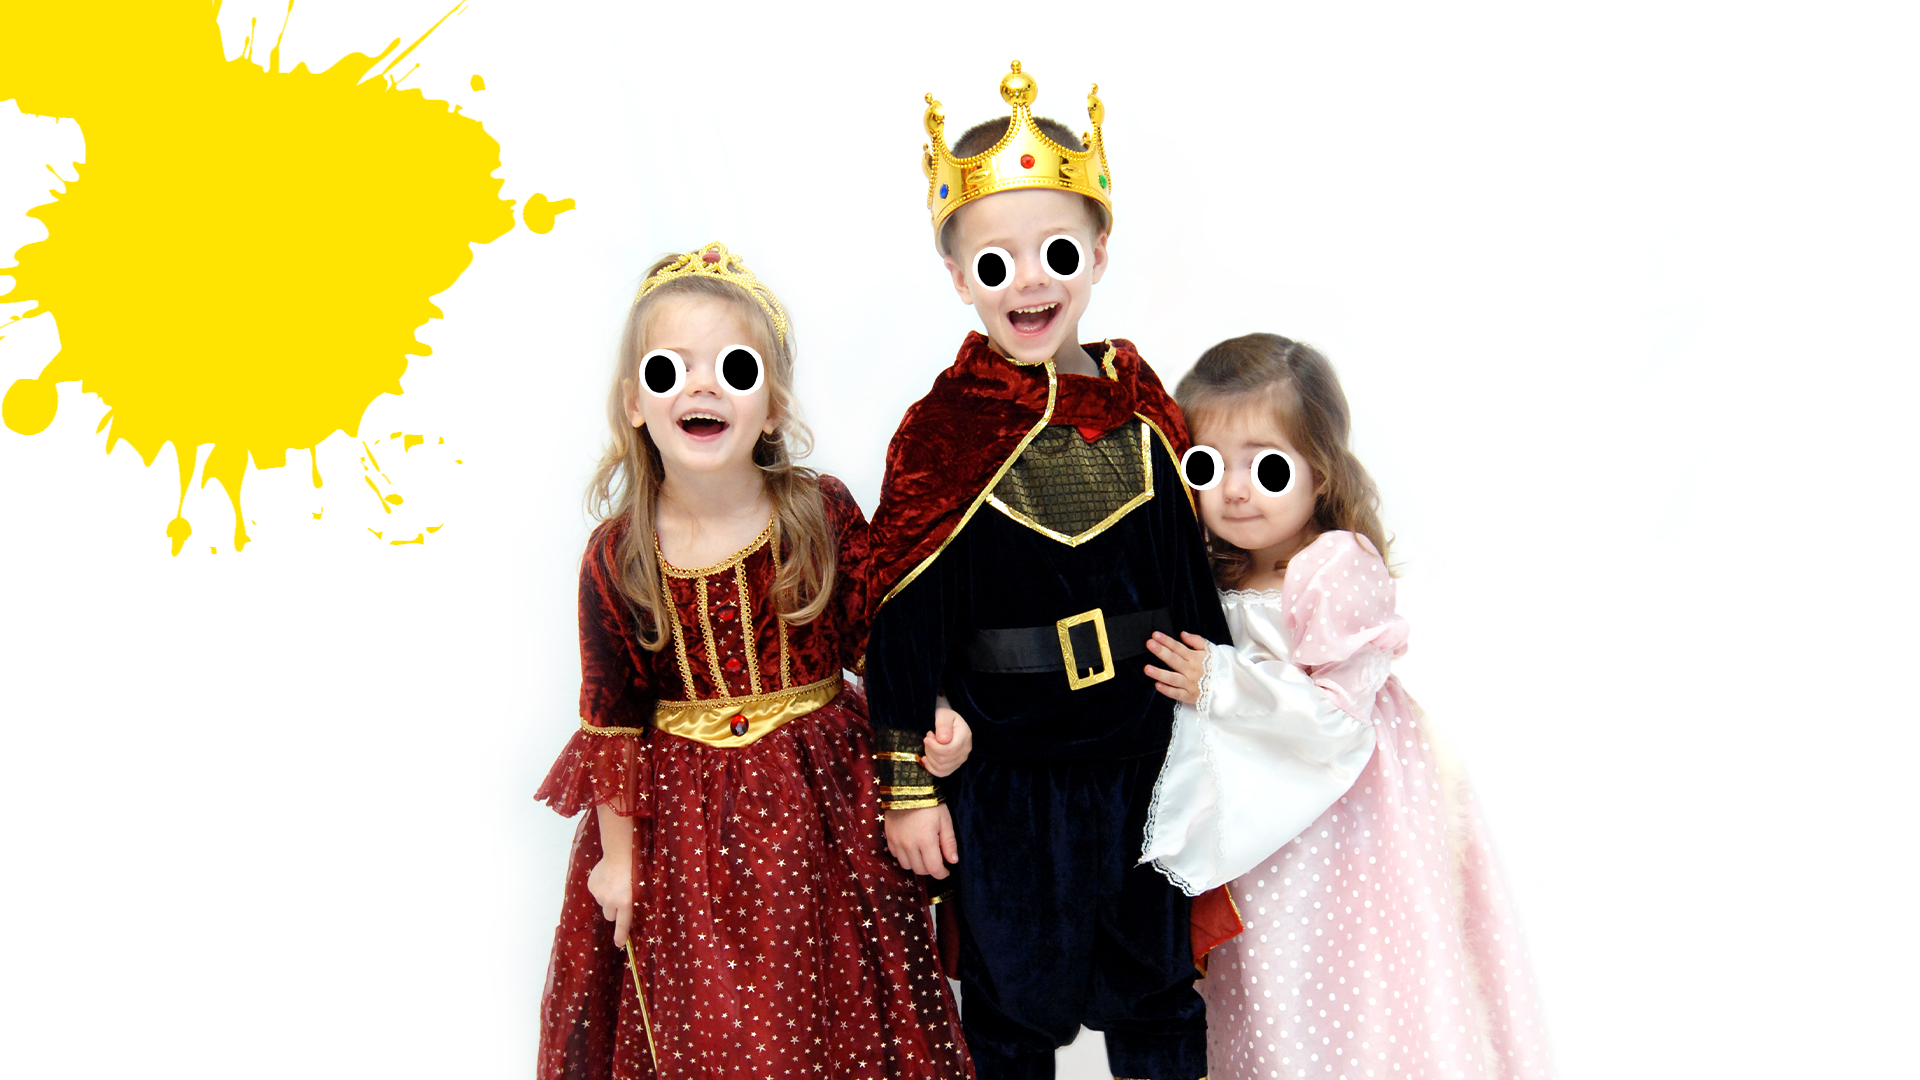 Children dressed as royals on white background with yellow splats